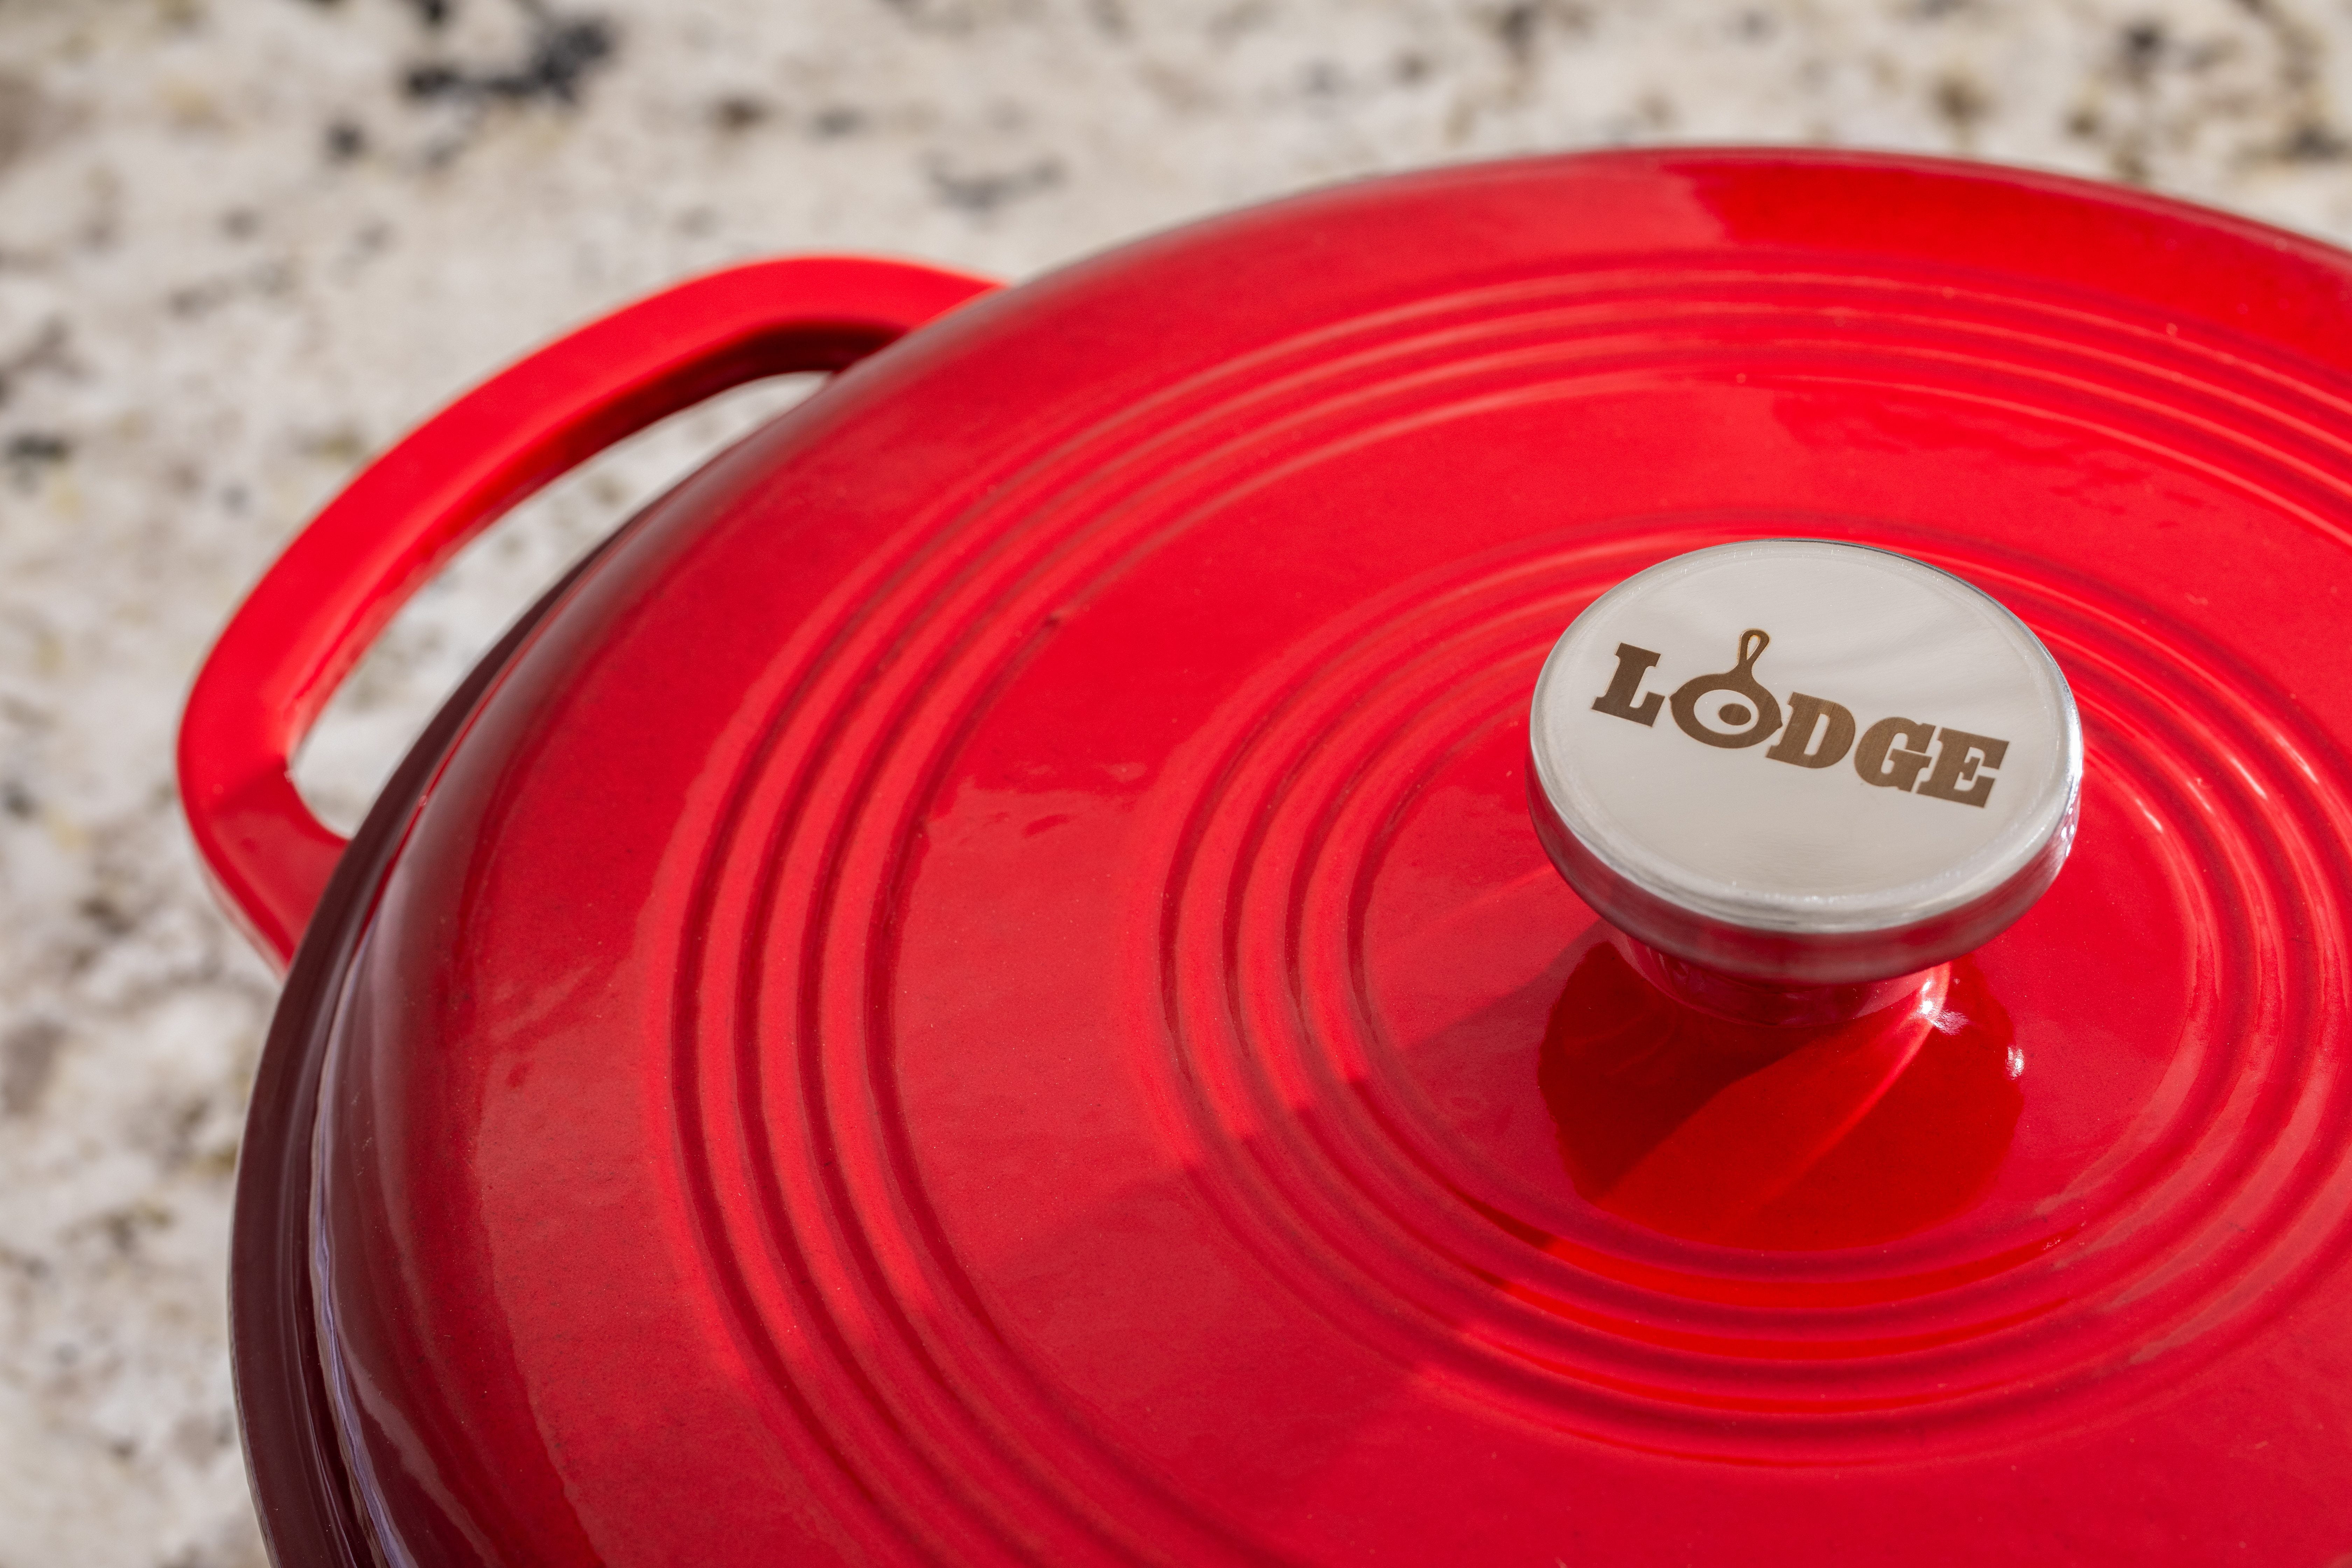 Lodge 7 qt. Red Enameled Cast Iron Dutch Oven EC7OD43 - The Home Depot